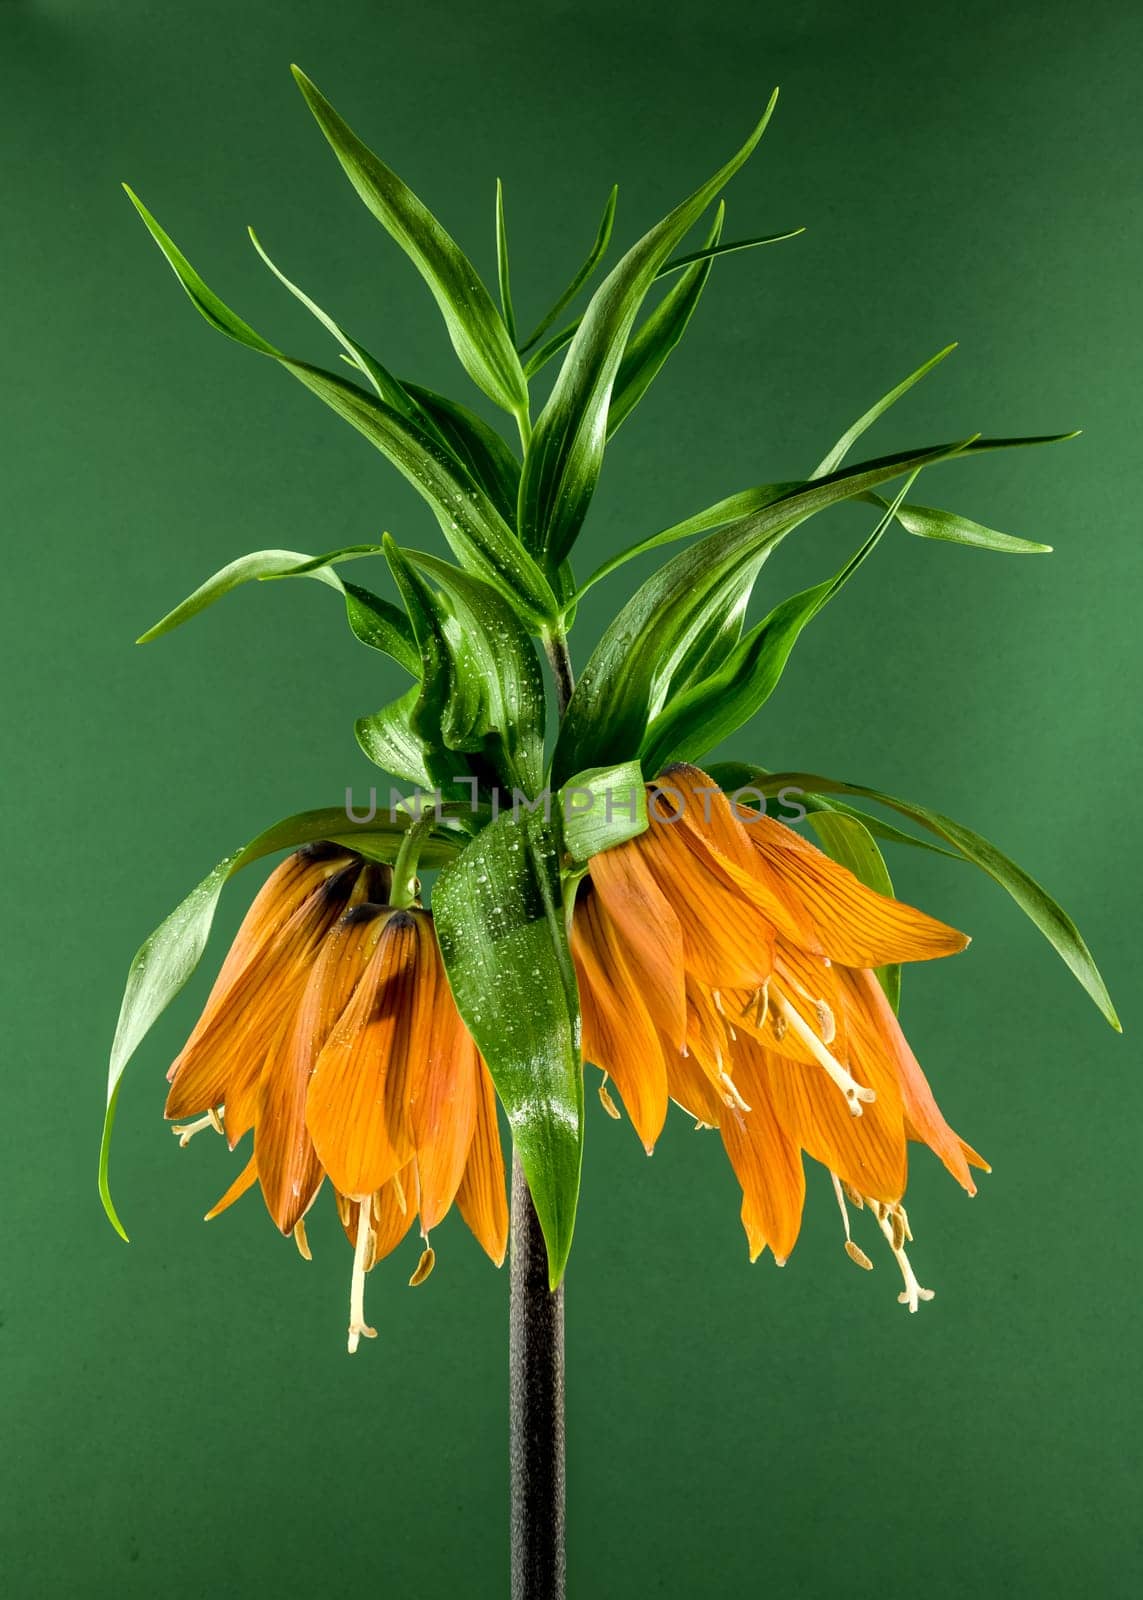 Beautiful Crown imperial flower blossom on a green background. Flower head close-up.